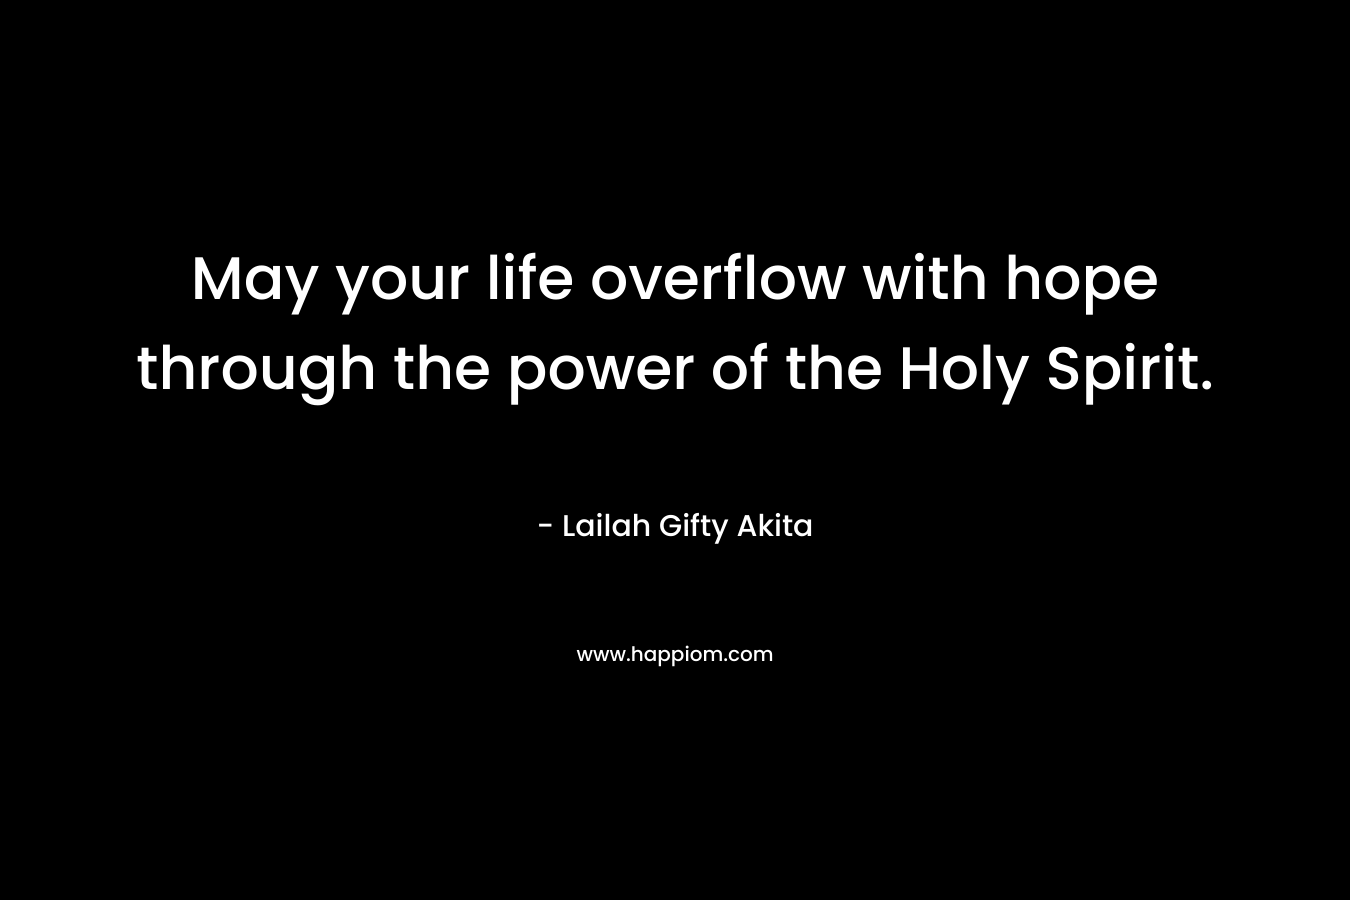 May your life overflow with hope through the power of the Holy Spirit.